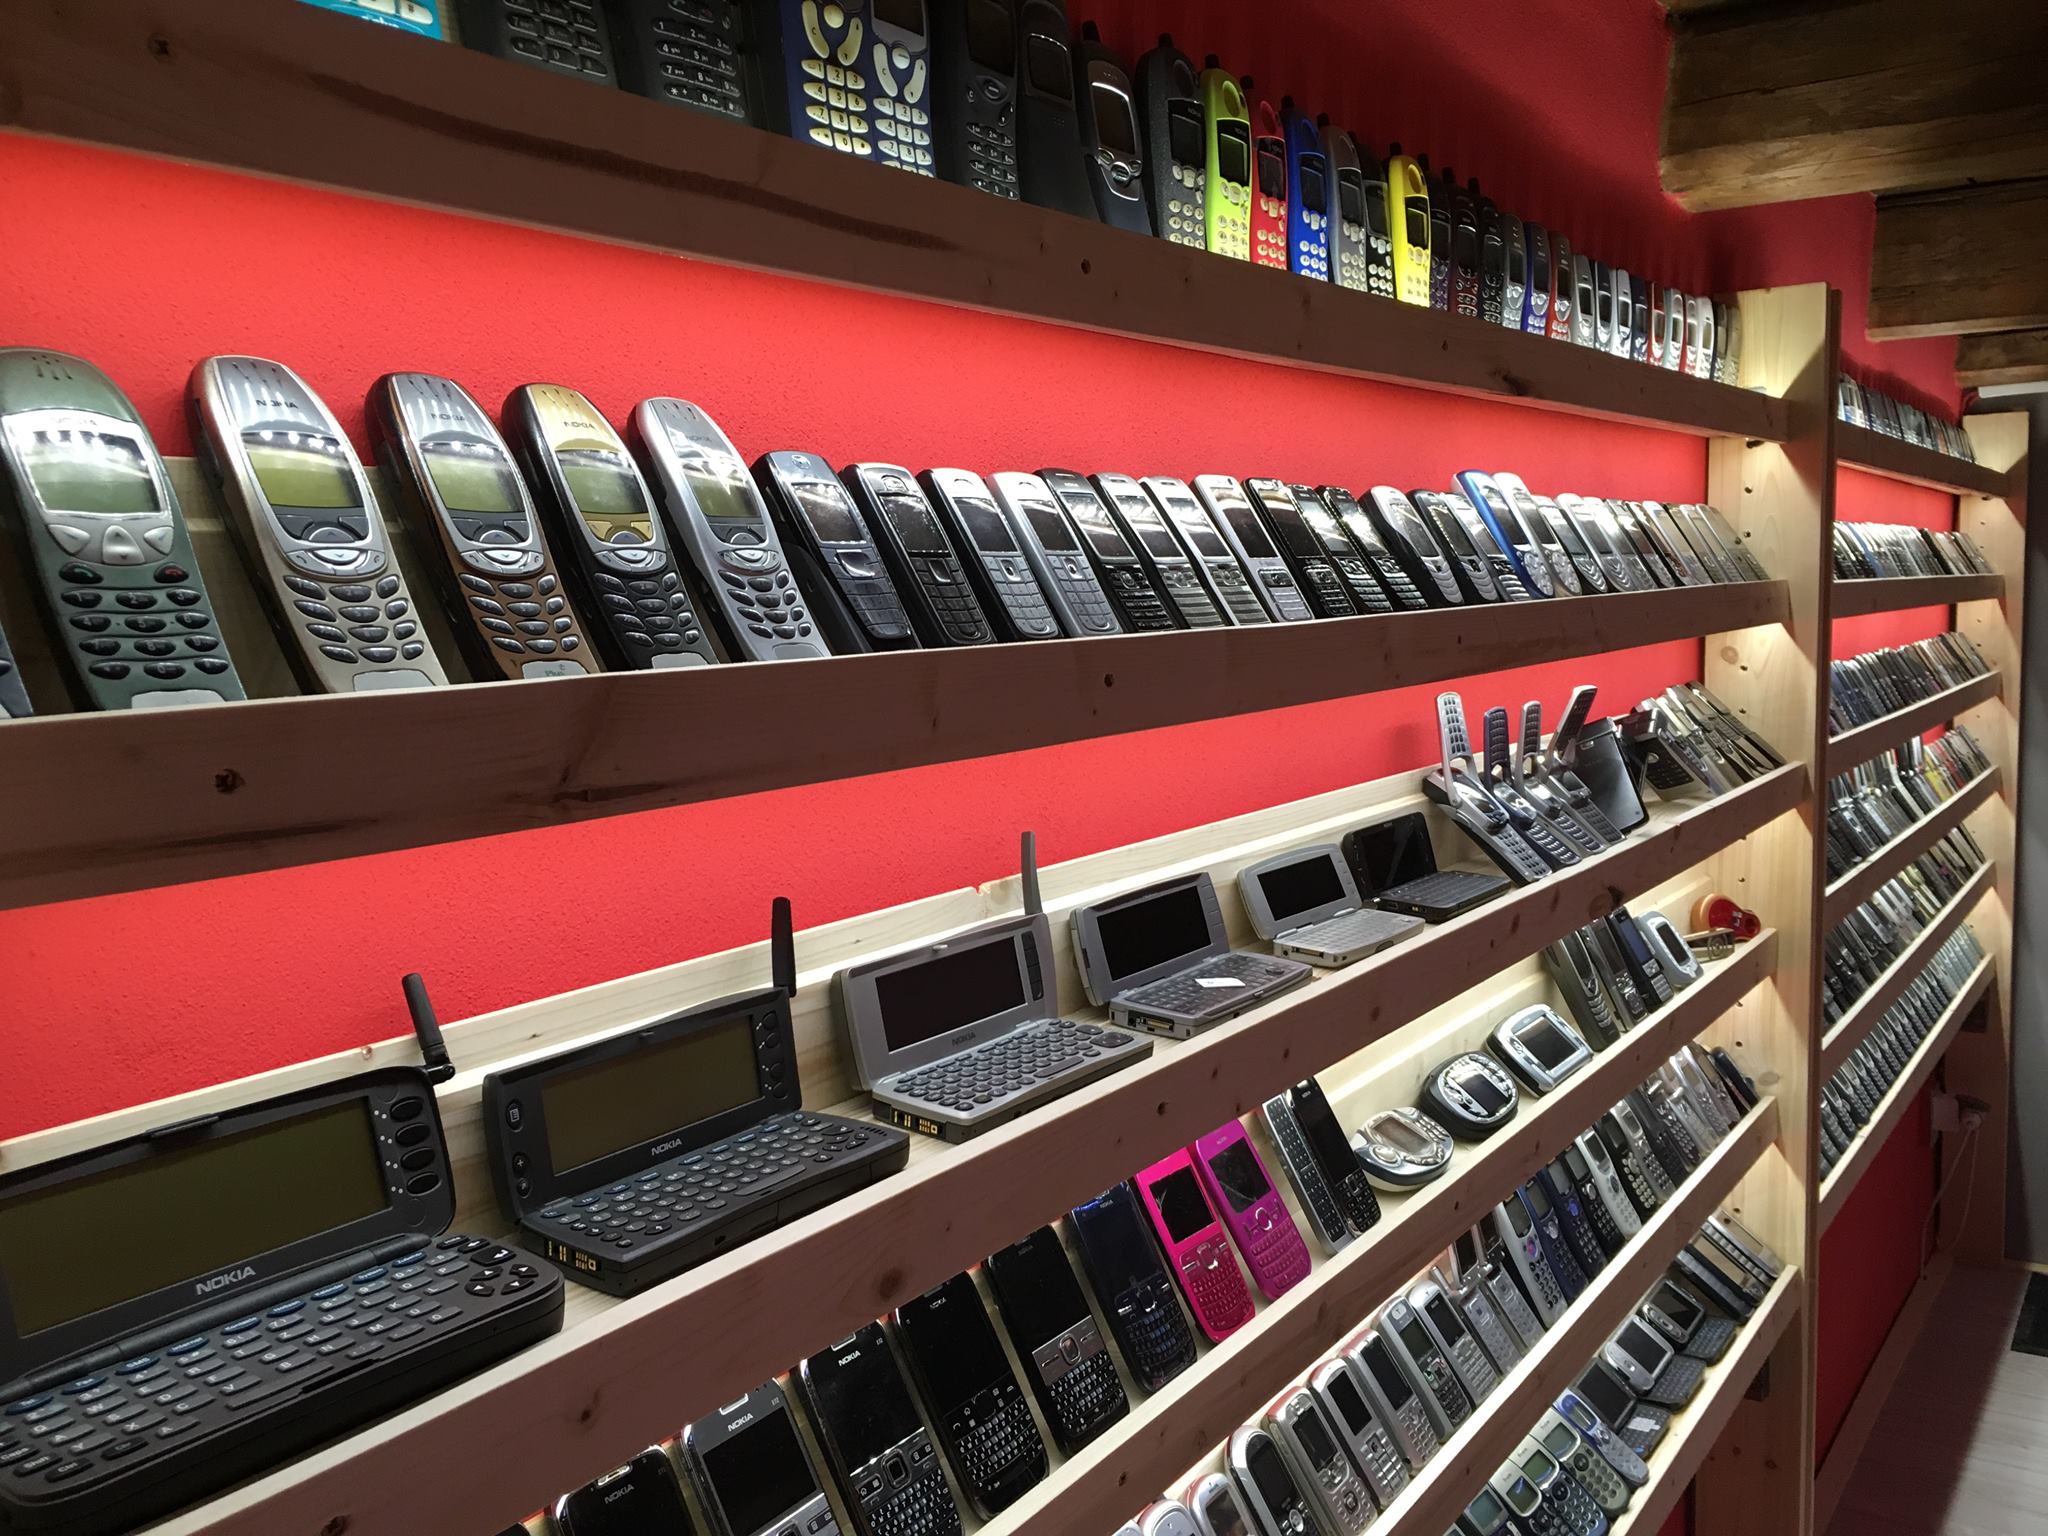 Museum of Old Mobile phones